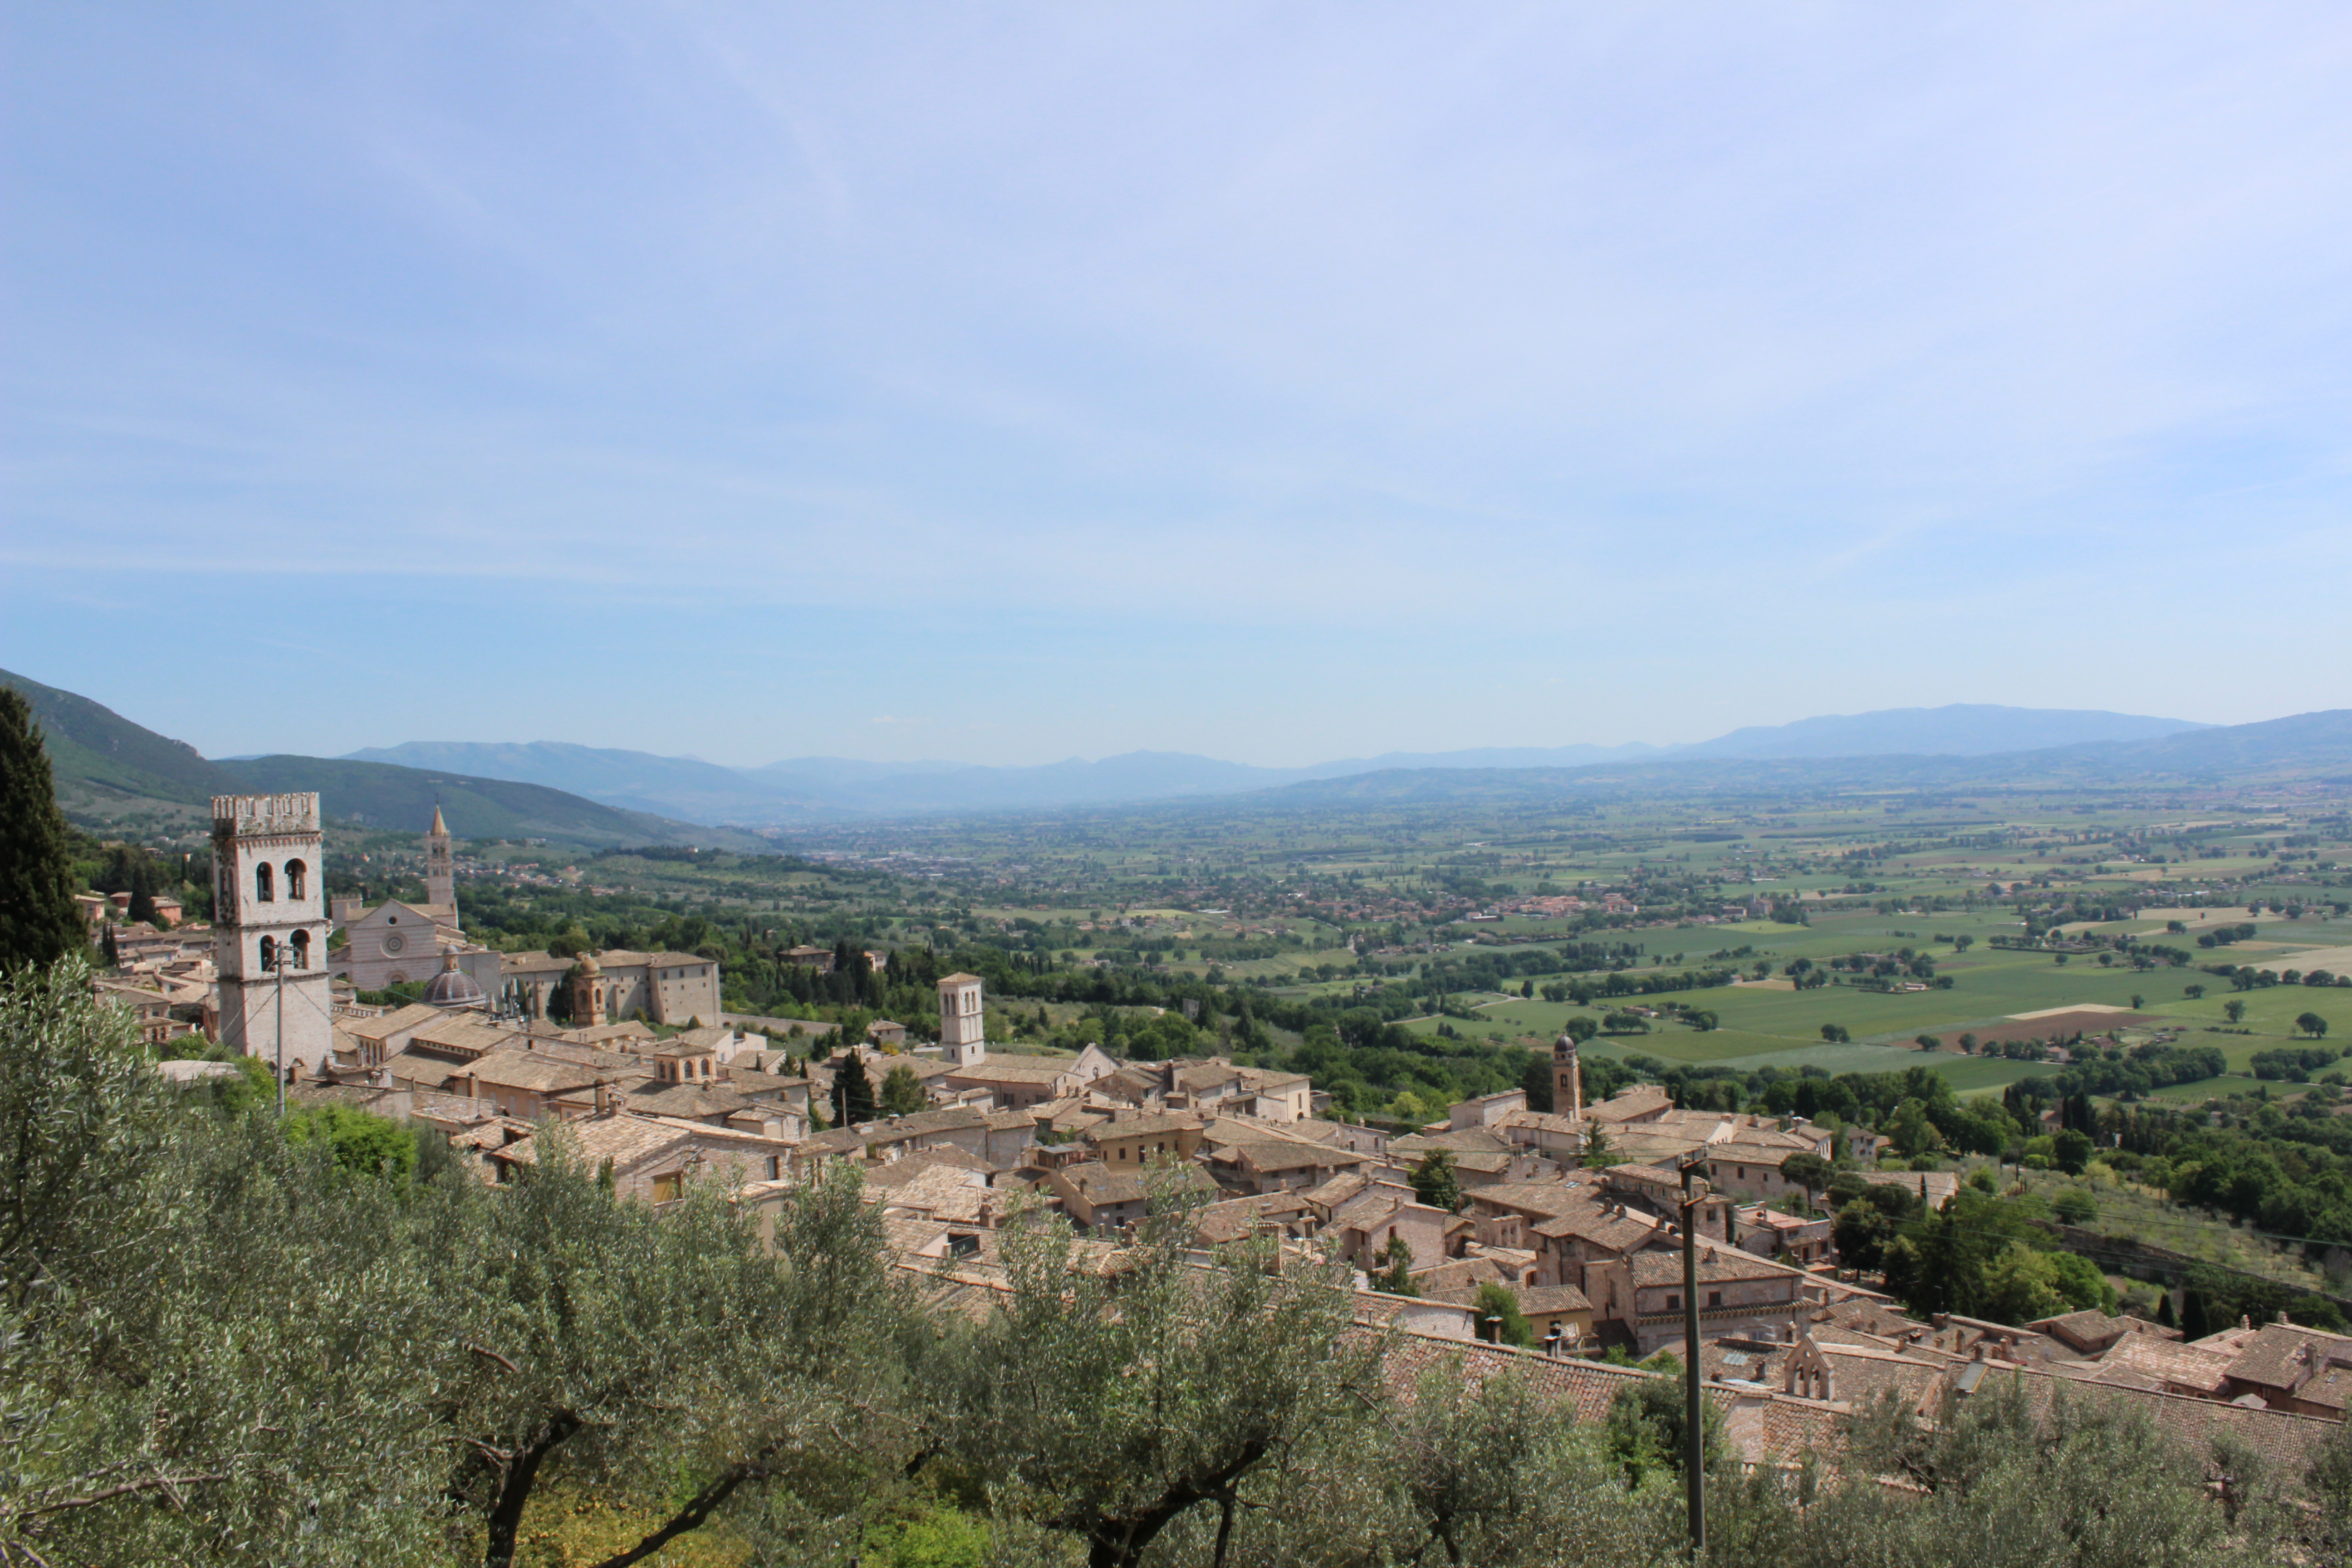 View from San Damiano church, Assisi